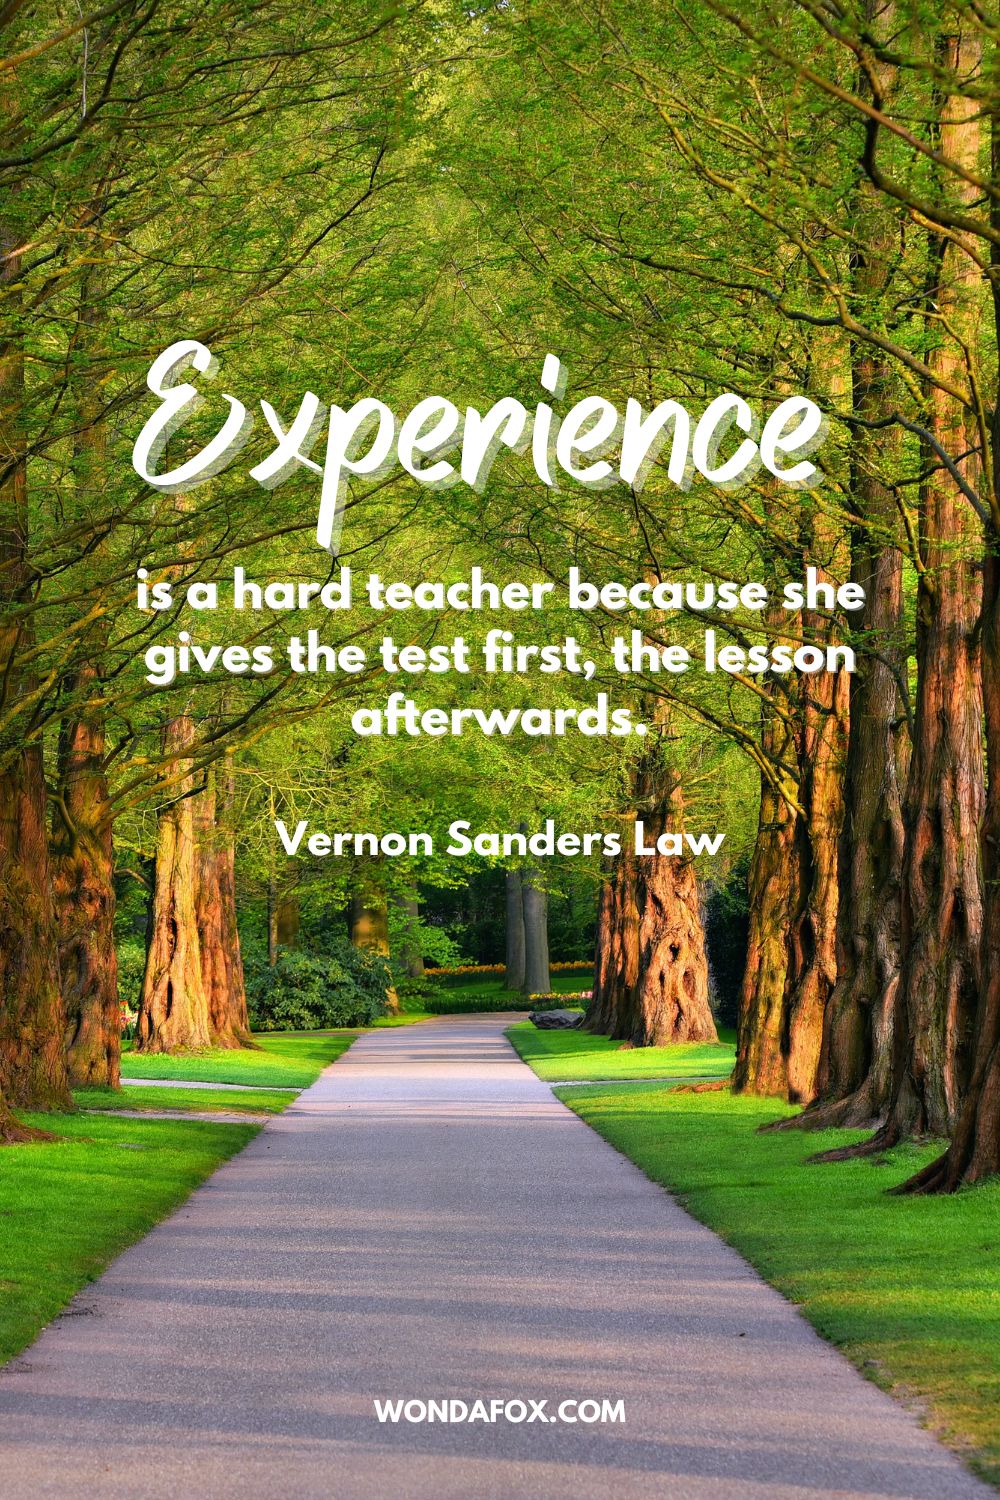 Experience is a hard teacher because she gives the test first, the lesson afterwards. Vernon Sanders Law